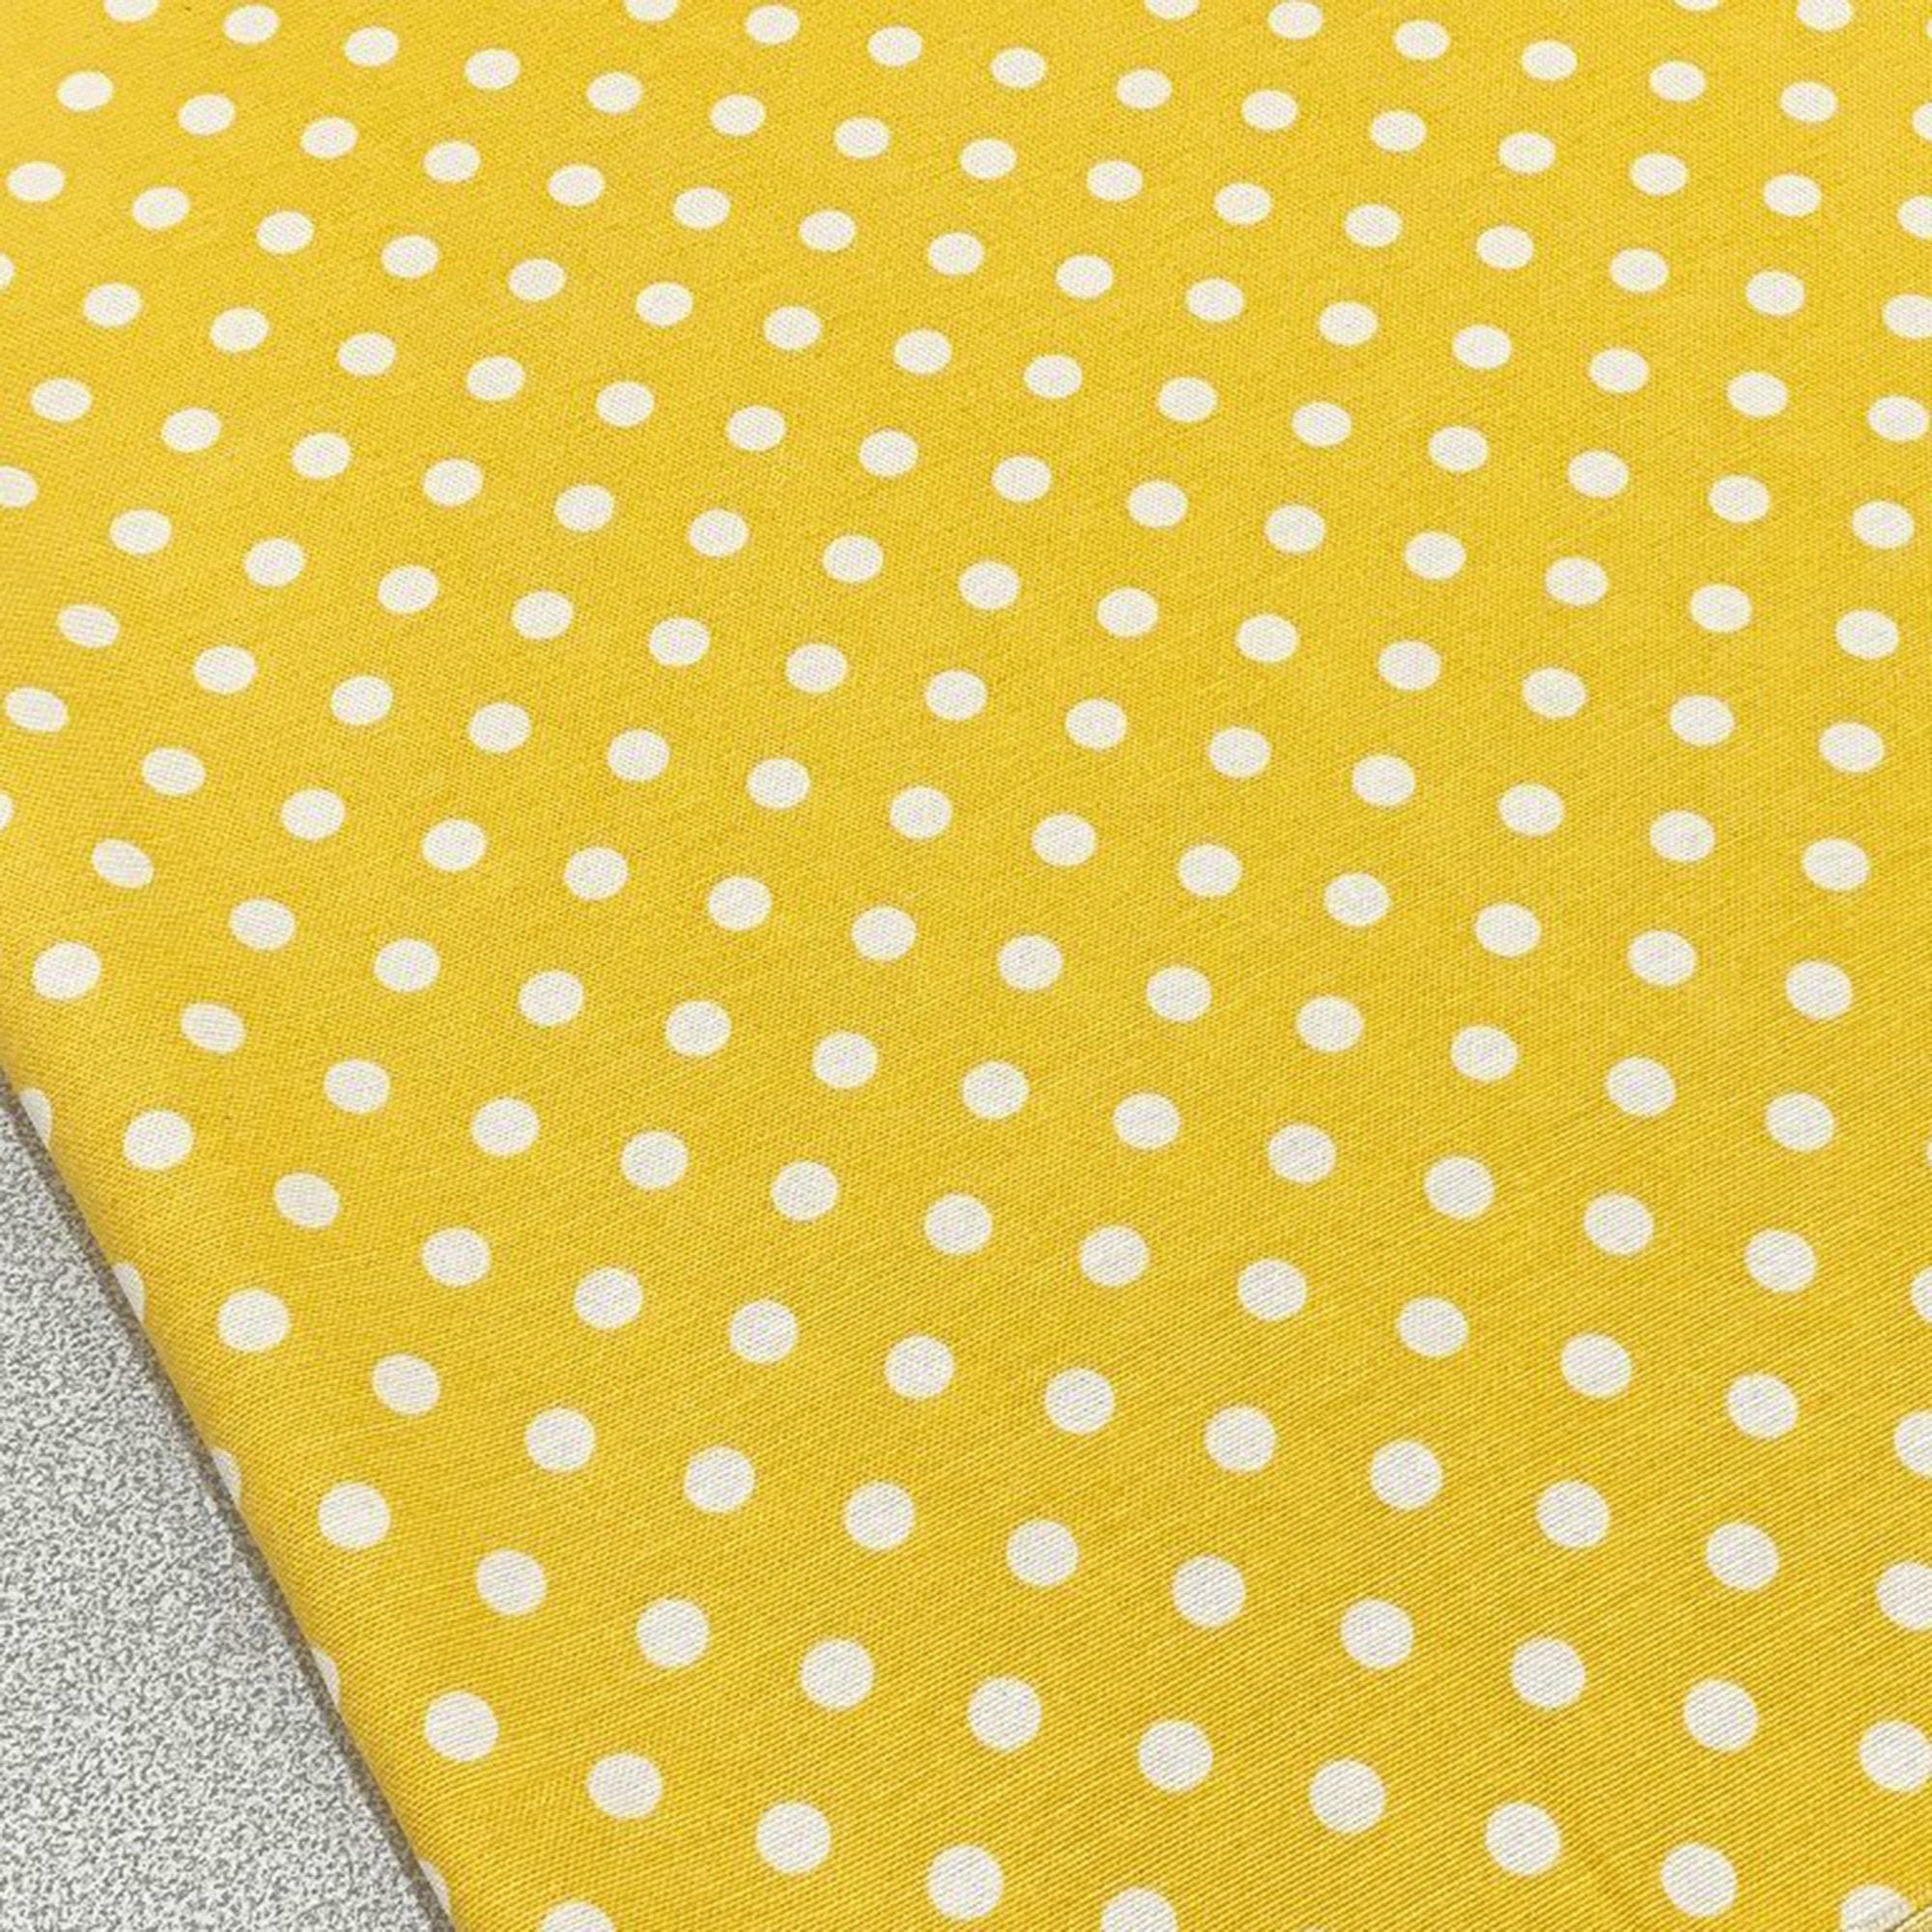 Yellow Polka Dot Fabric Water Resistant Cotton Canvas Outdoor Material  Polkadot Home Decor Curtain Furnishing Upholstery Fabric by the Yard 